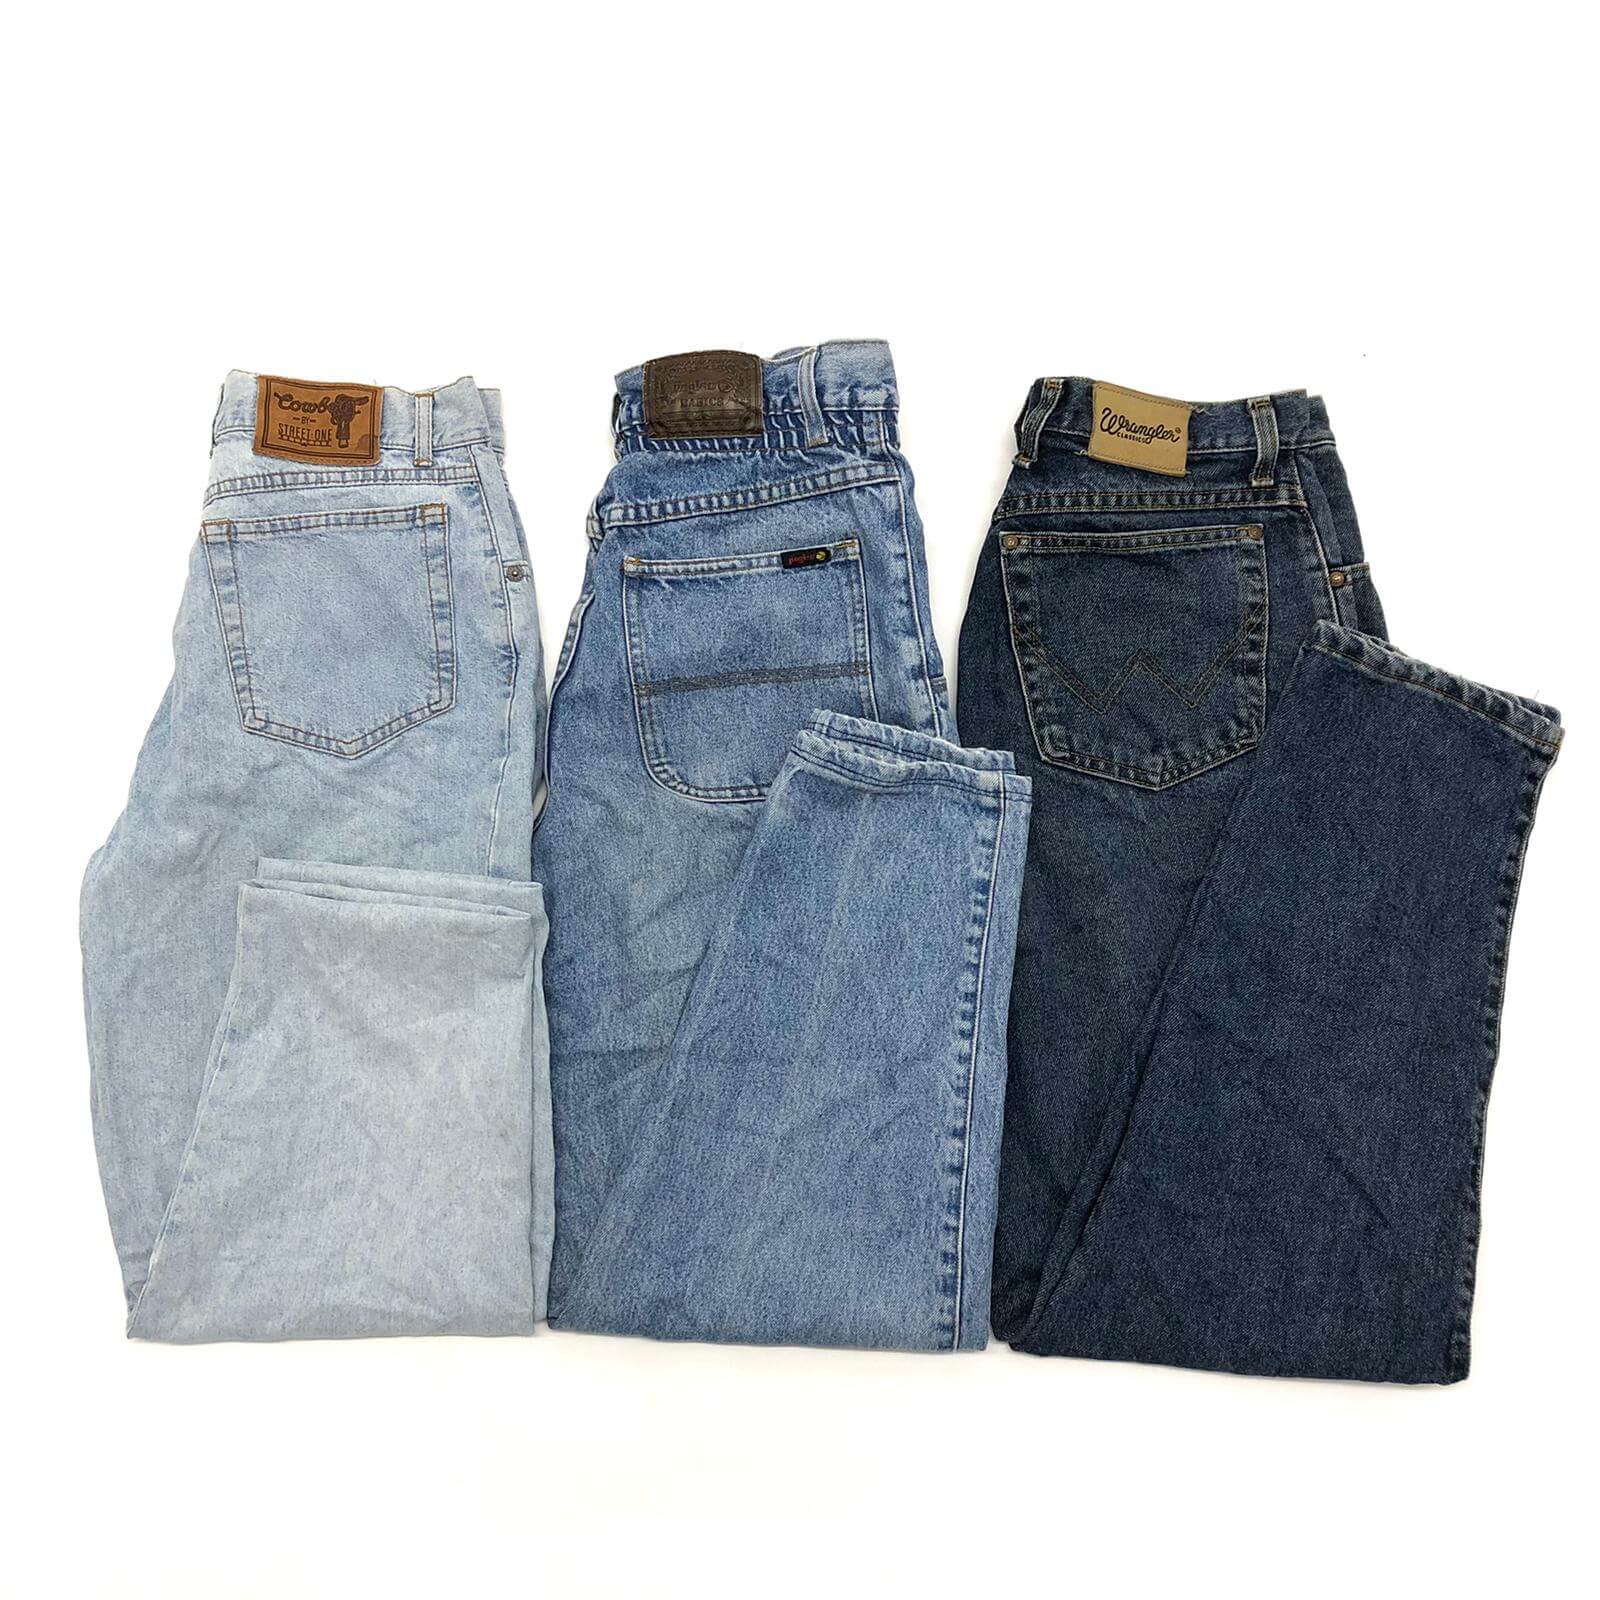 HOW TO SHOP FOR VINTAGE JEANS